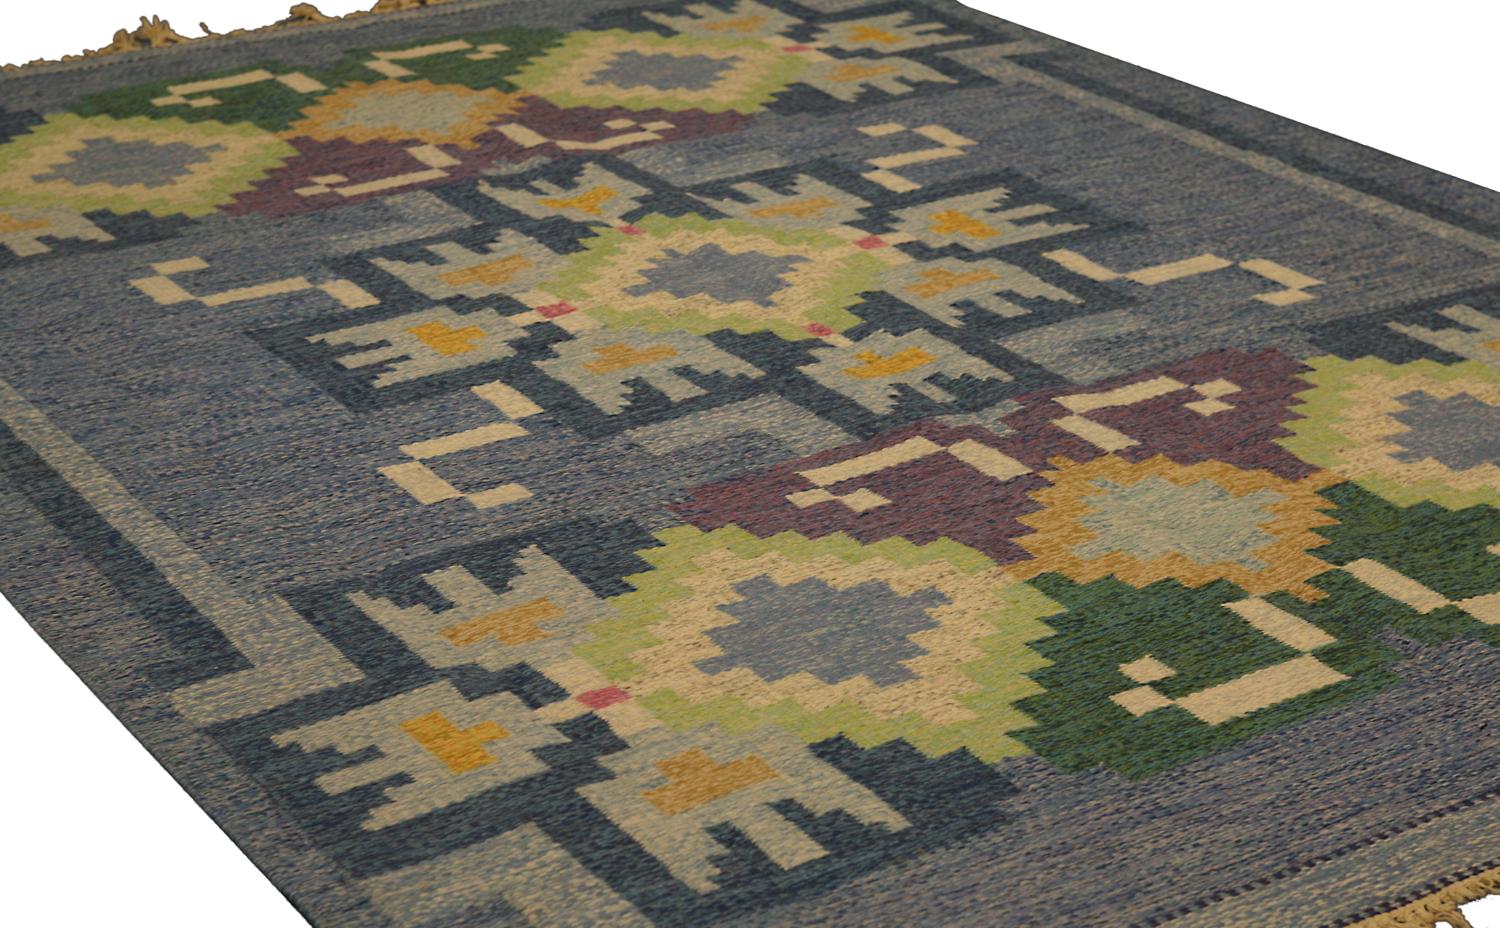 This is a Vintage Swedish kilim woven circa 1920-1950 and it measures 230 X 164 cm. The design of this kilim is attributed to Ingegerd Silow, one of the most influential designers in the golden period of Scandinavian design. This fabulous kilim is a